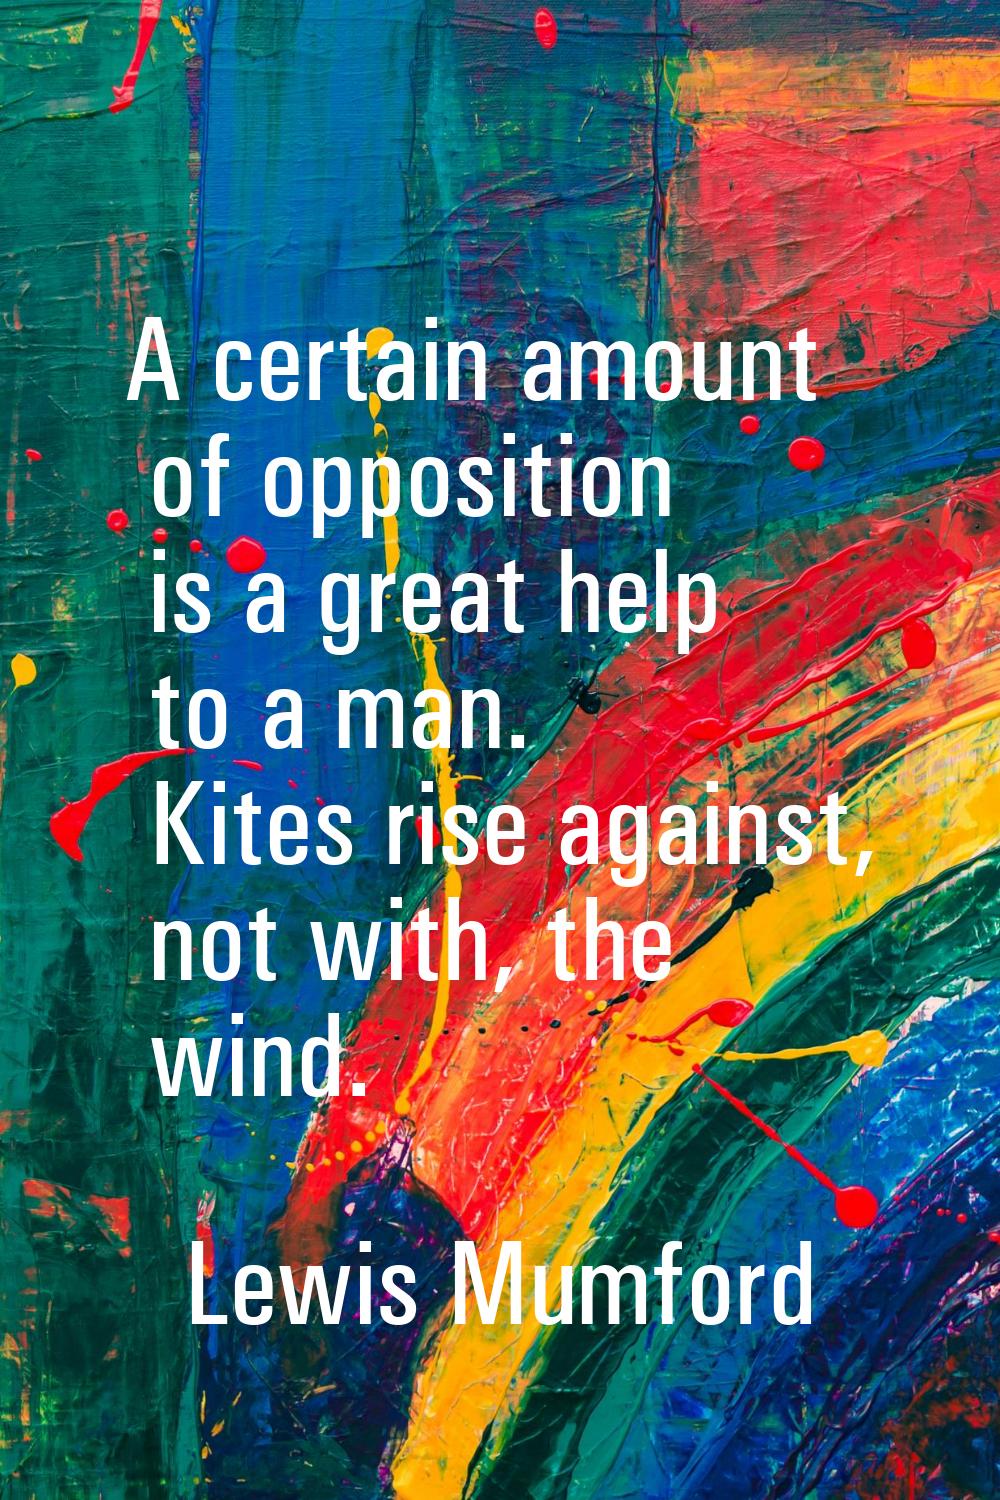 A certain amount of opposition is a great help to a man. Kites rise against, not with, the wind.